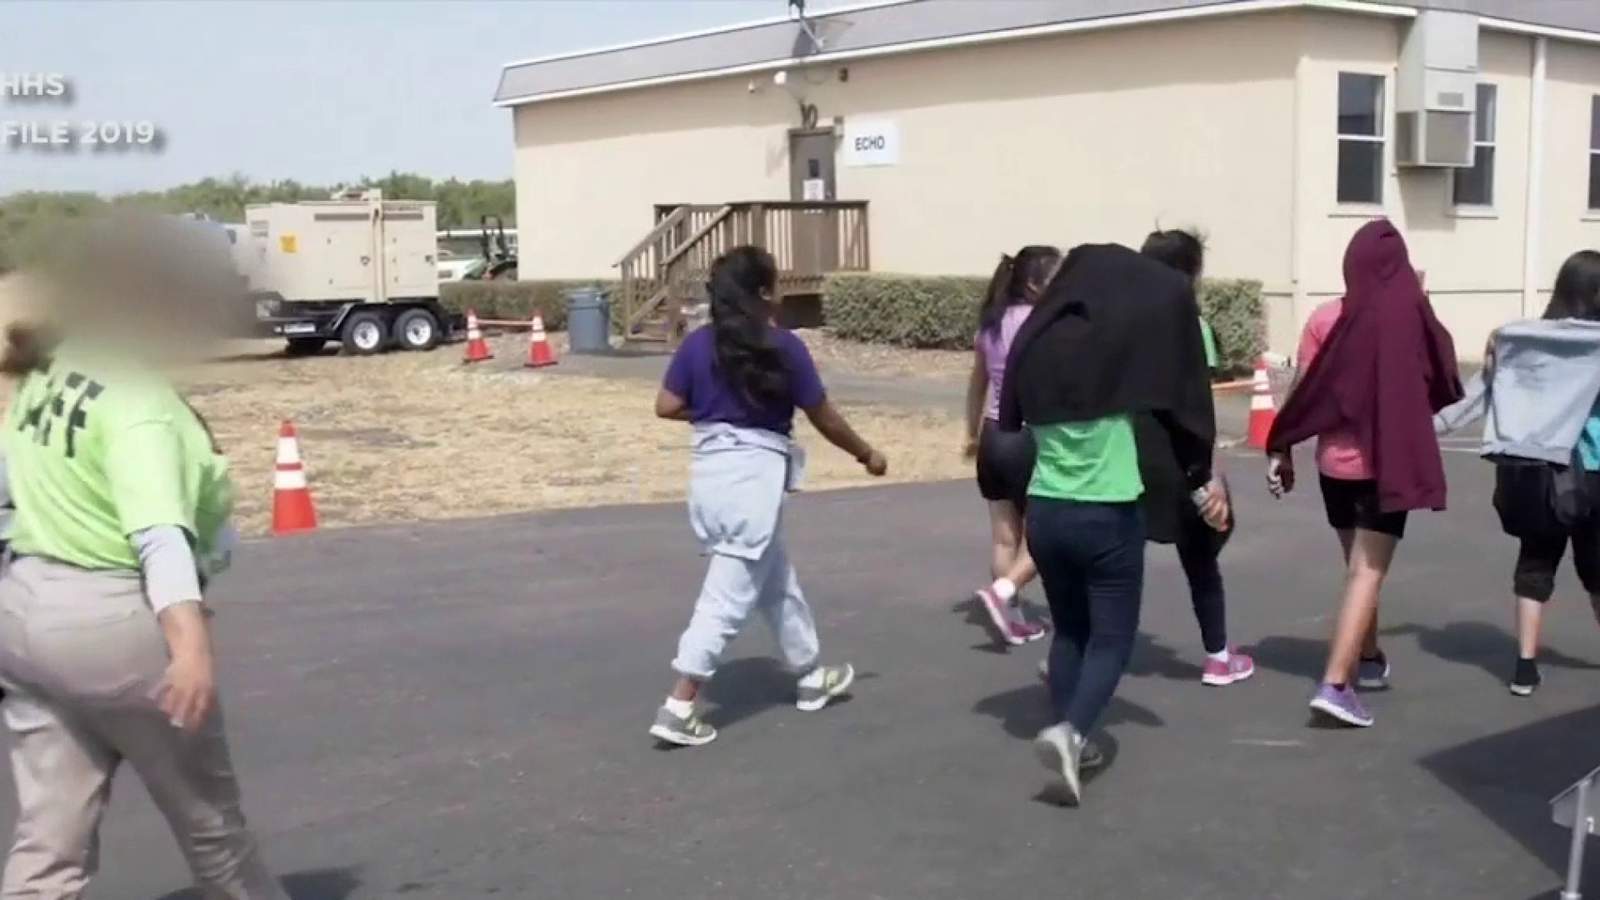 Child migrant facility reopened by Biden administration in South Texas draws criticism from immigration advocates